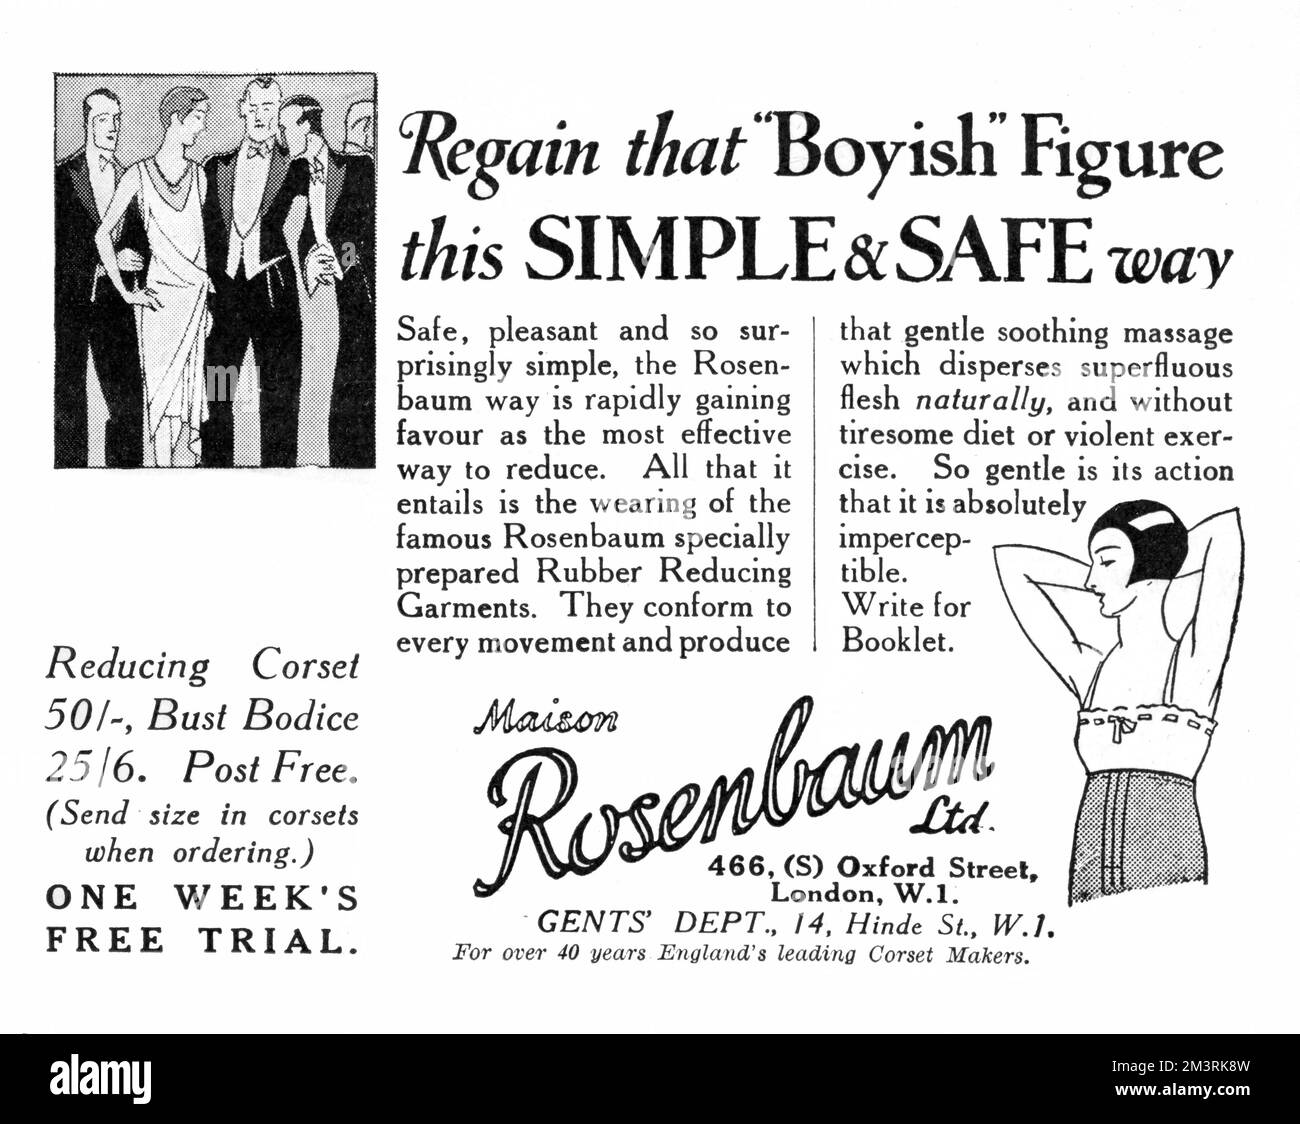 Advertisement from The Sketch for Rosenbaum Rubber Reducing Garments. Their range of corsets and bodices &quot;disperses superfluous flesh naturally&quot;.   1928 Stock Photo